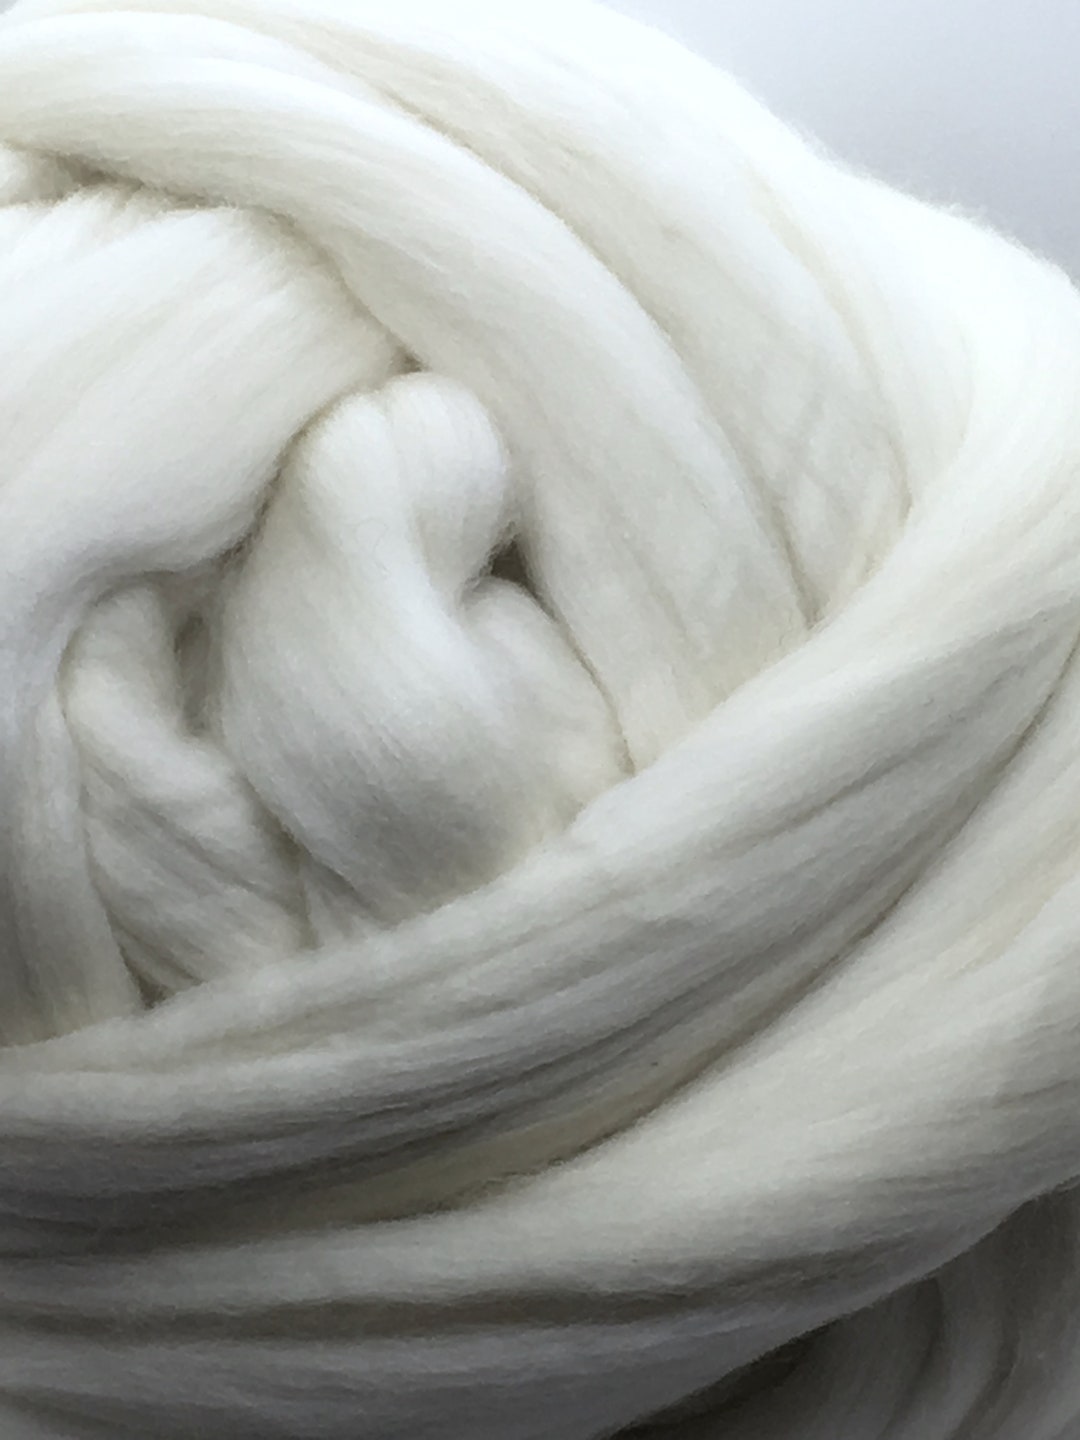 Combed Top (Roving) Yarn – 4 oz. – Made in Nevada